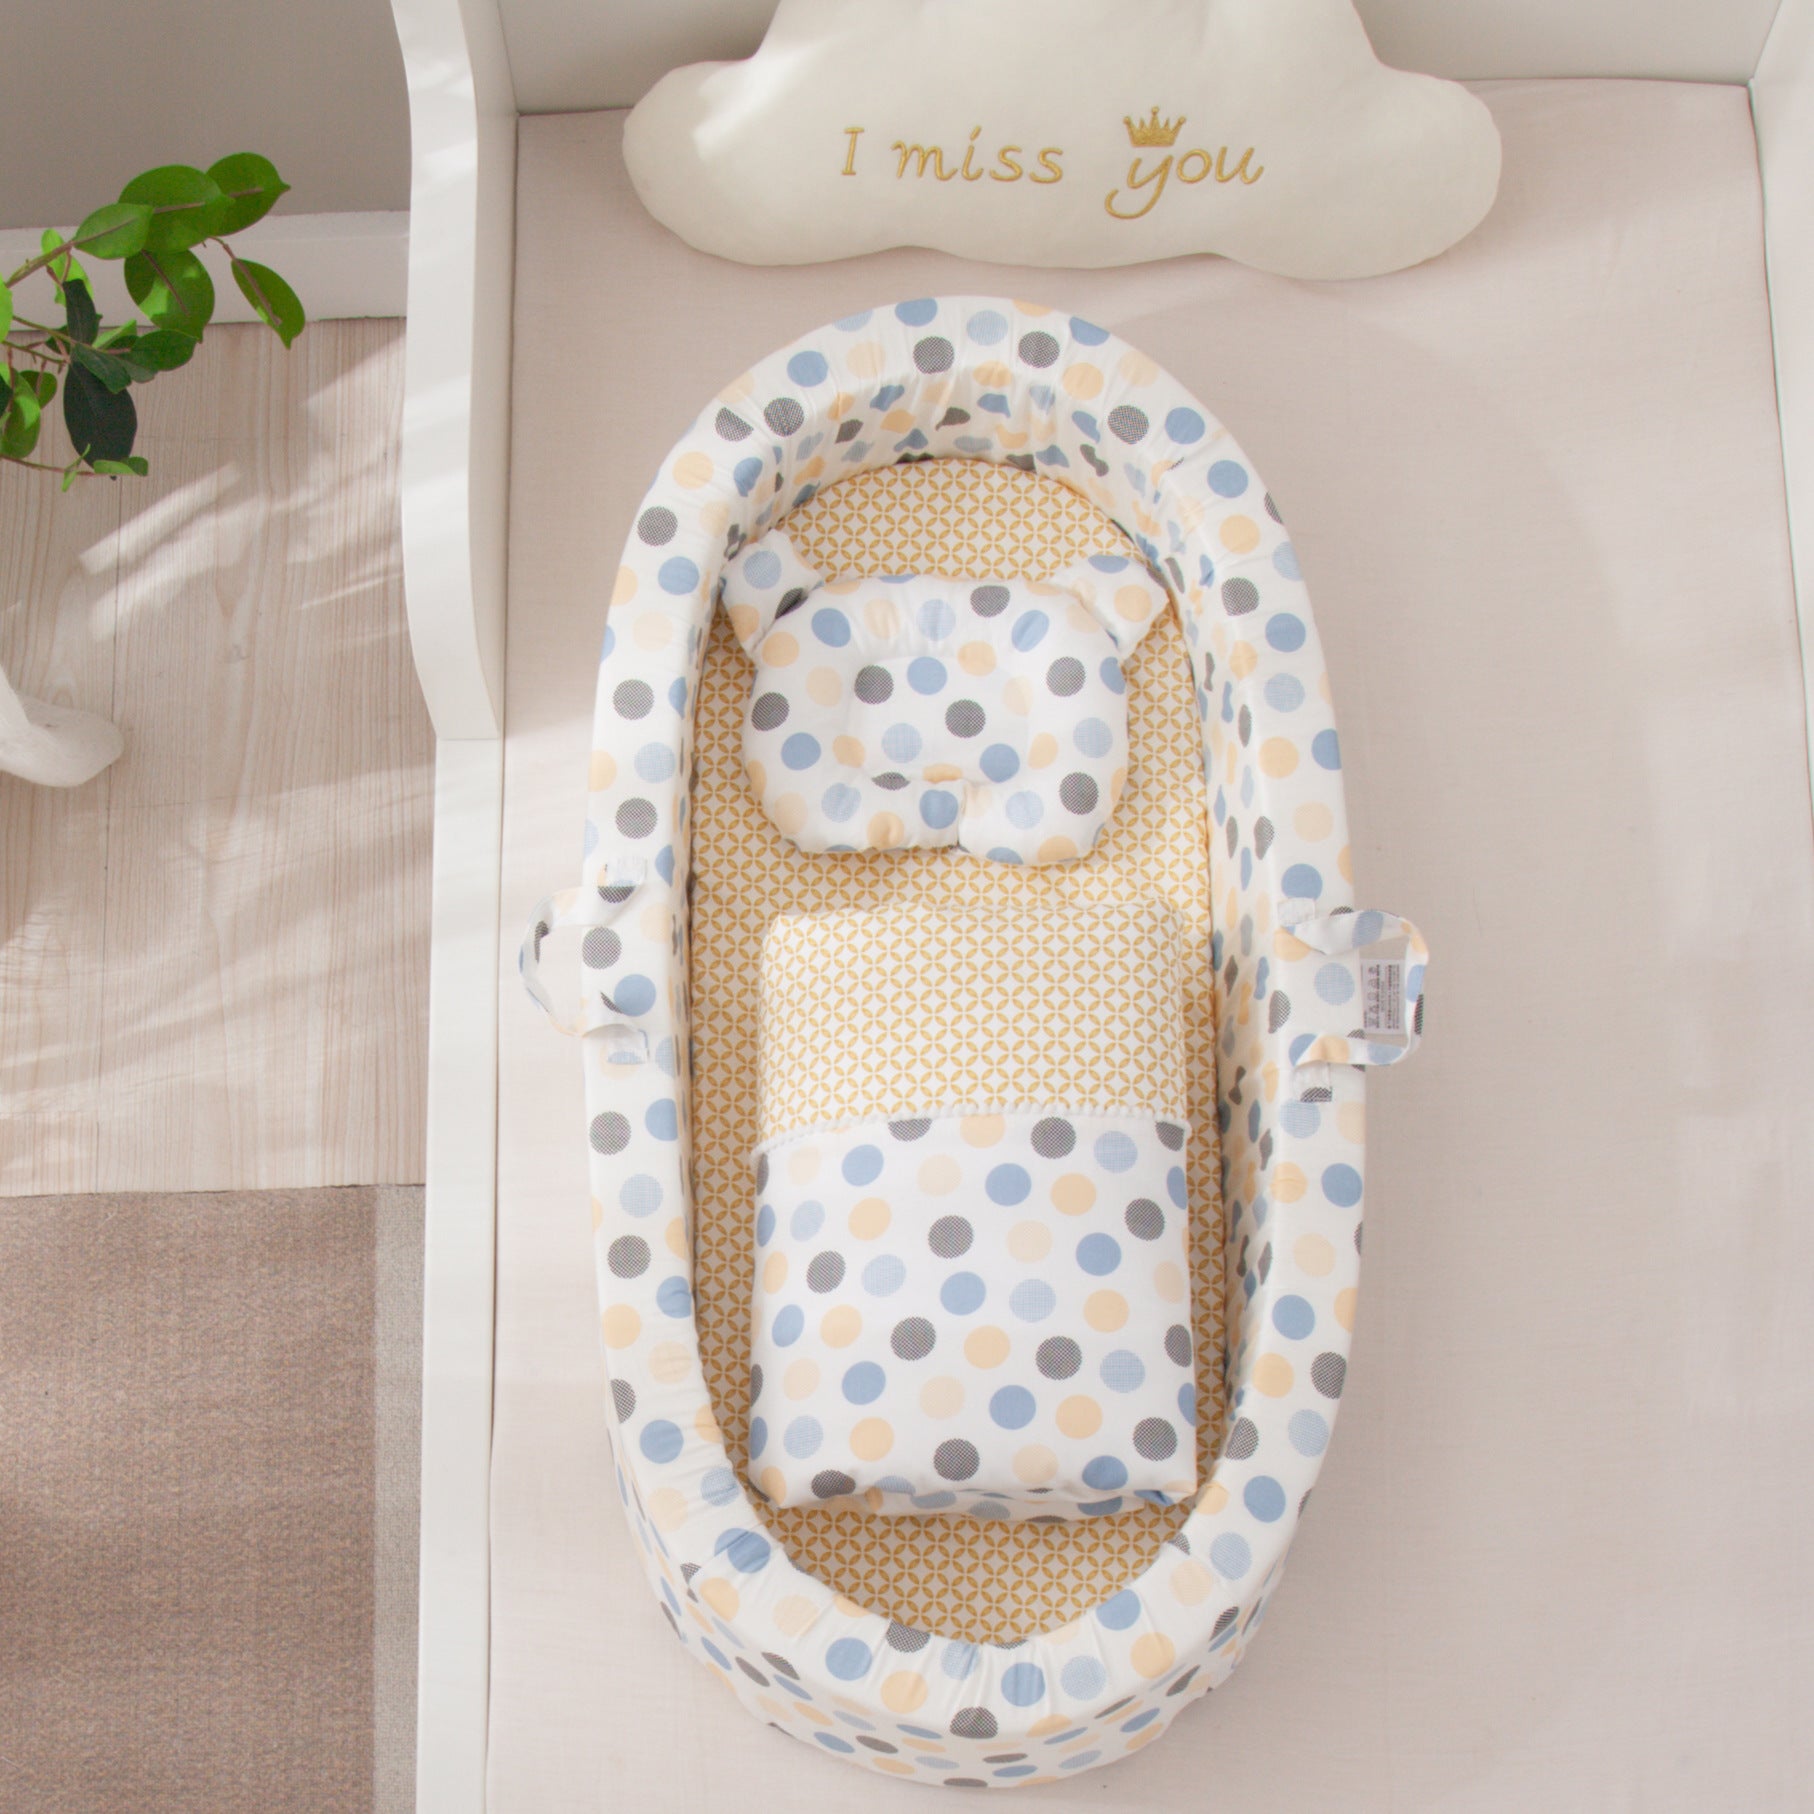 Removable Baby Bed